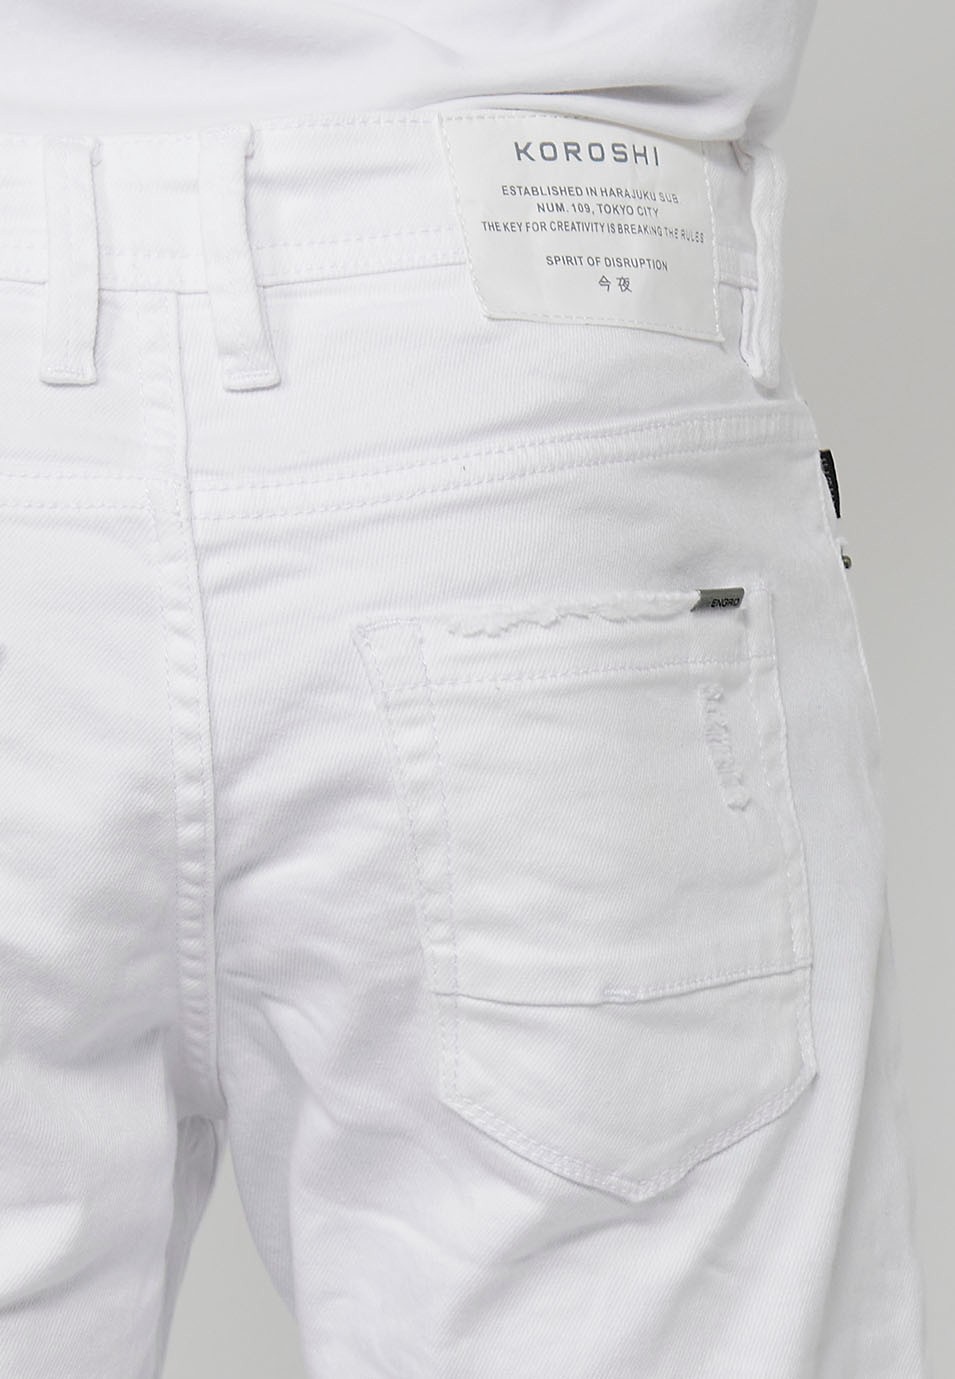 Denim Bermuda shorts with turn-up finish and front closure with zipper and button in White for Men 8